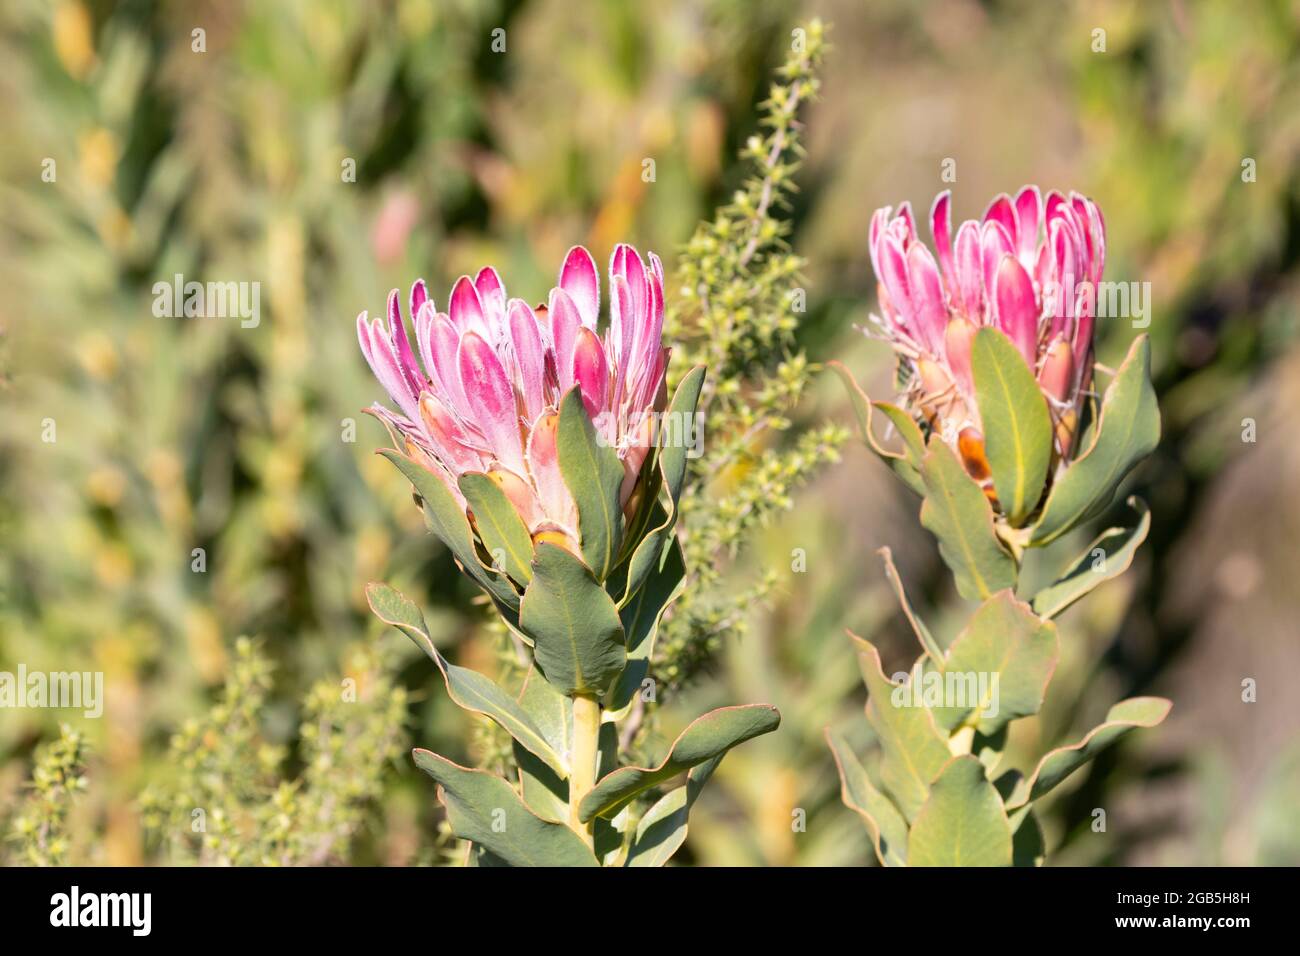 Protea compacta (Bot River Sugarbush, Bot River Protea)  in the Hottentots Holland Mountains fynbos biome, Western Cape, South Africa. This plant is s Stock Photo